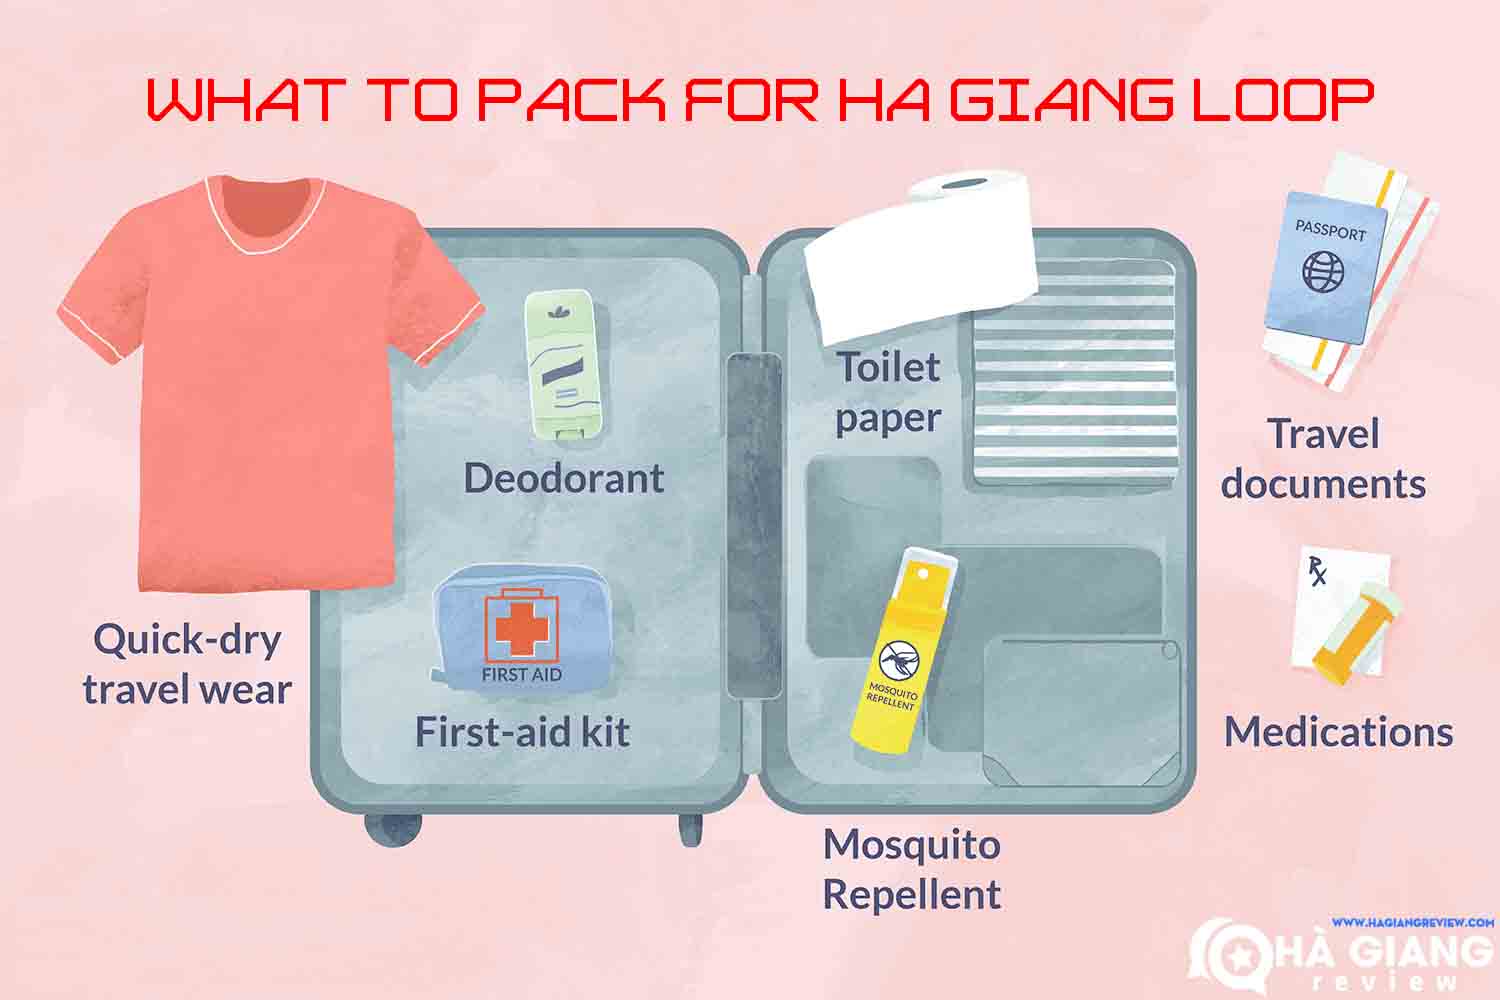 What to Pack for Ha Giang Loop